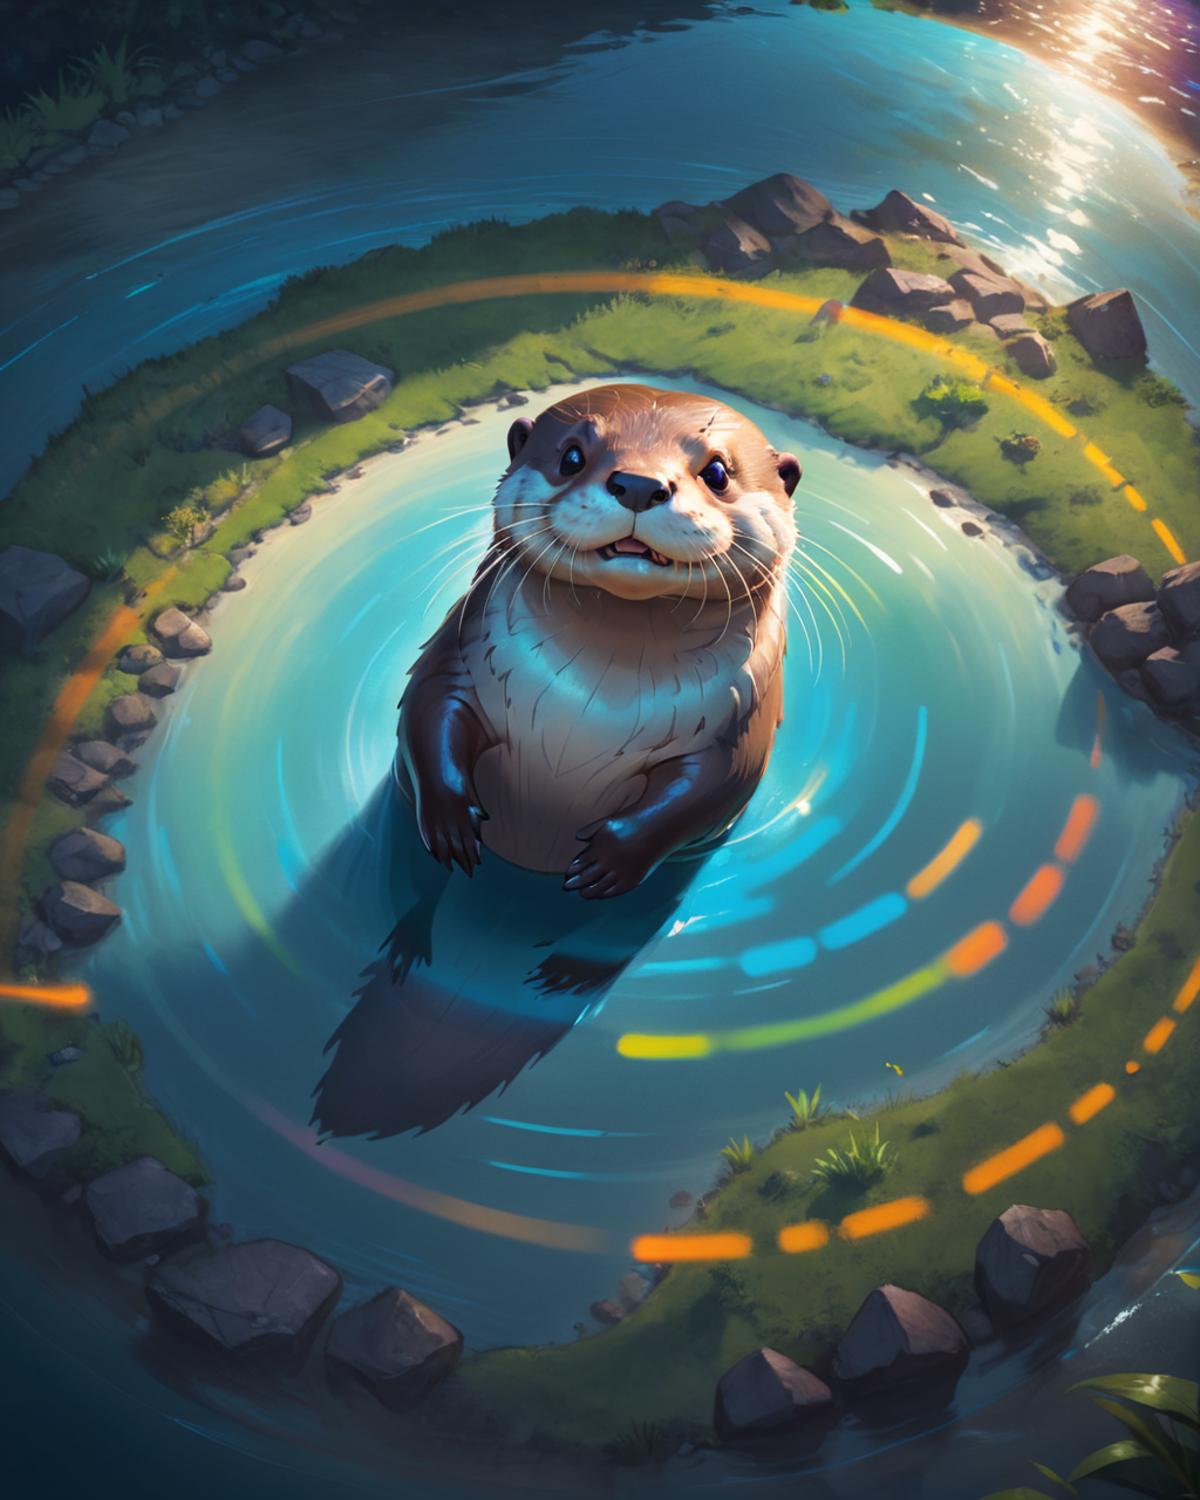 A beaver sitting in a circle of water surrounded by rocks.